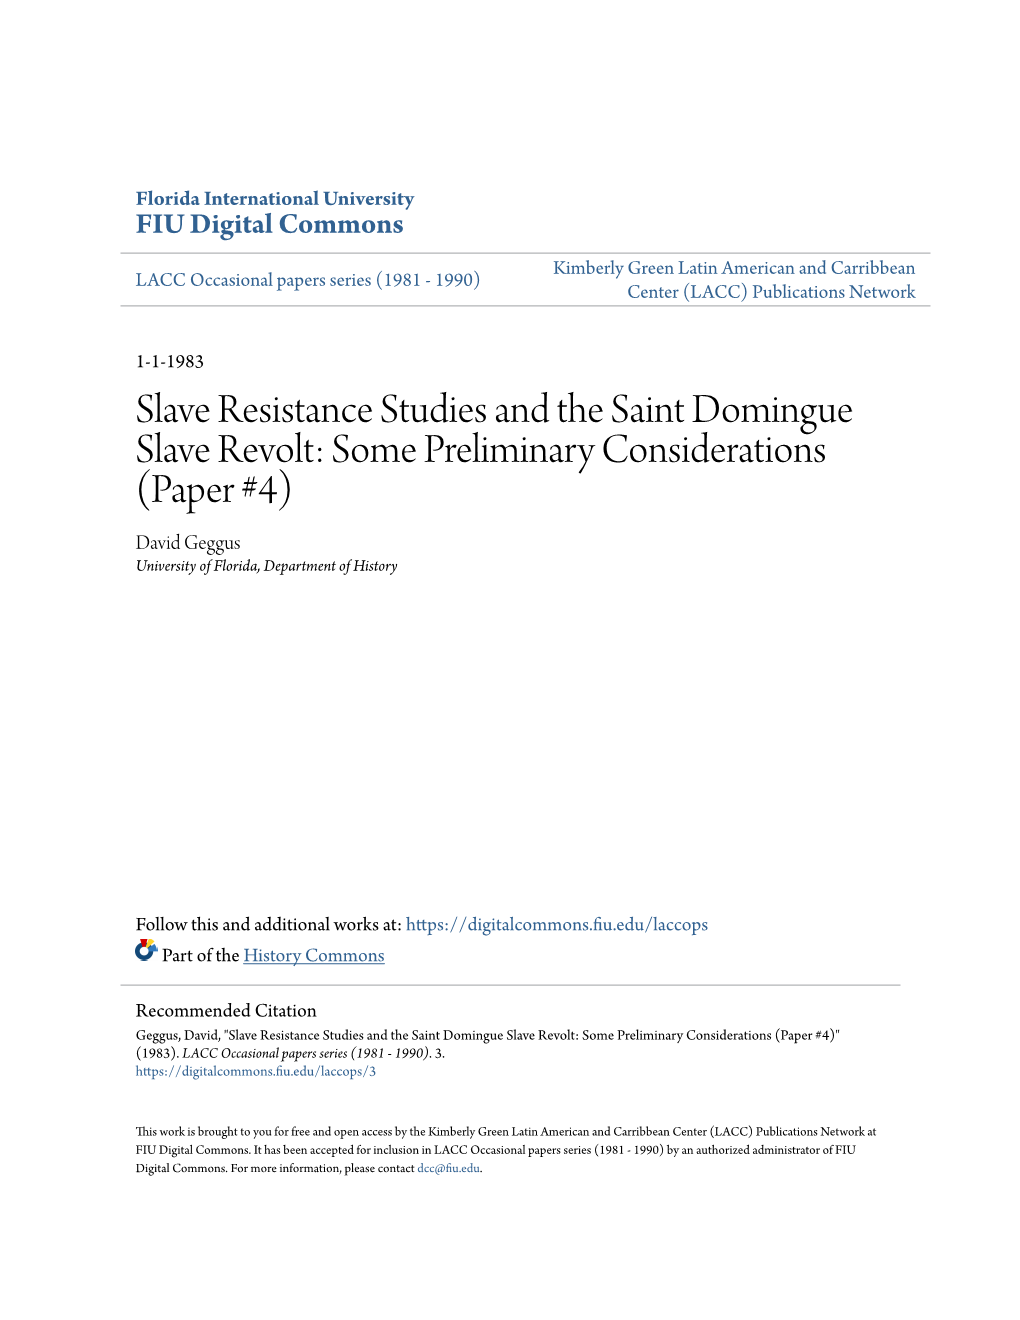 Slave Resistance Studies and the Saint Domingue Slave Revolt: Some Preliminary Considerations (Paper #4) David Geggus University of Florida, Department of History